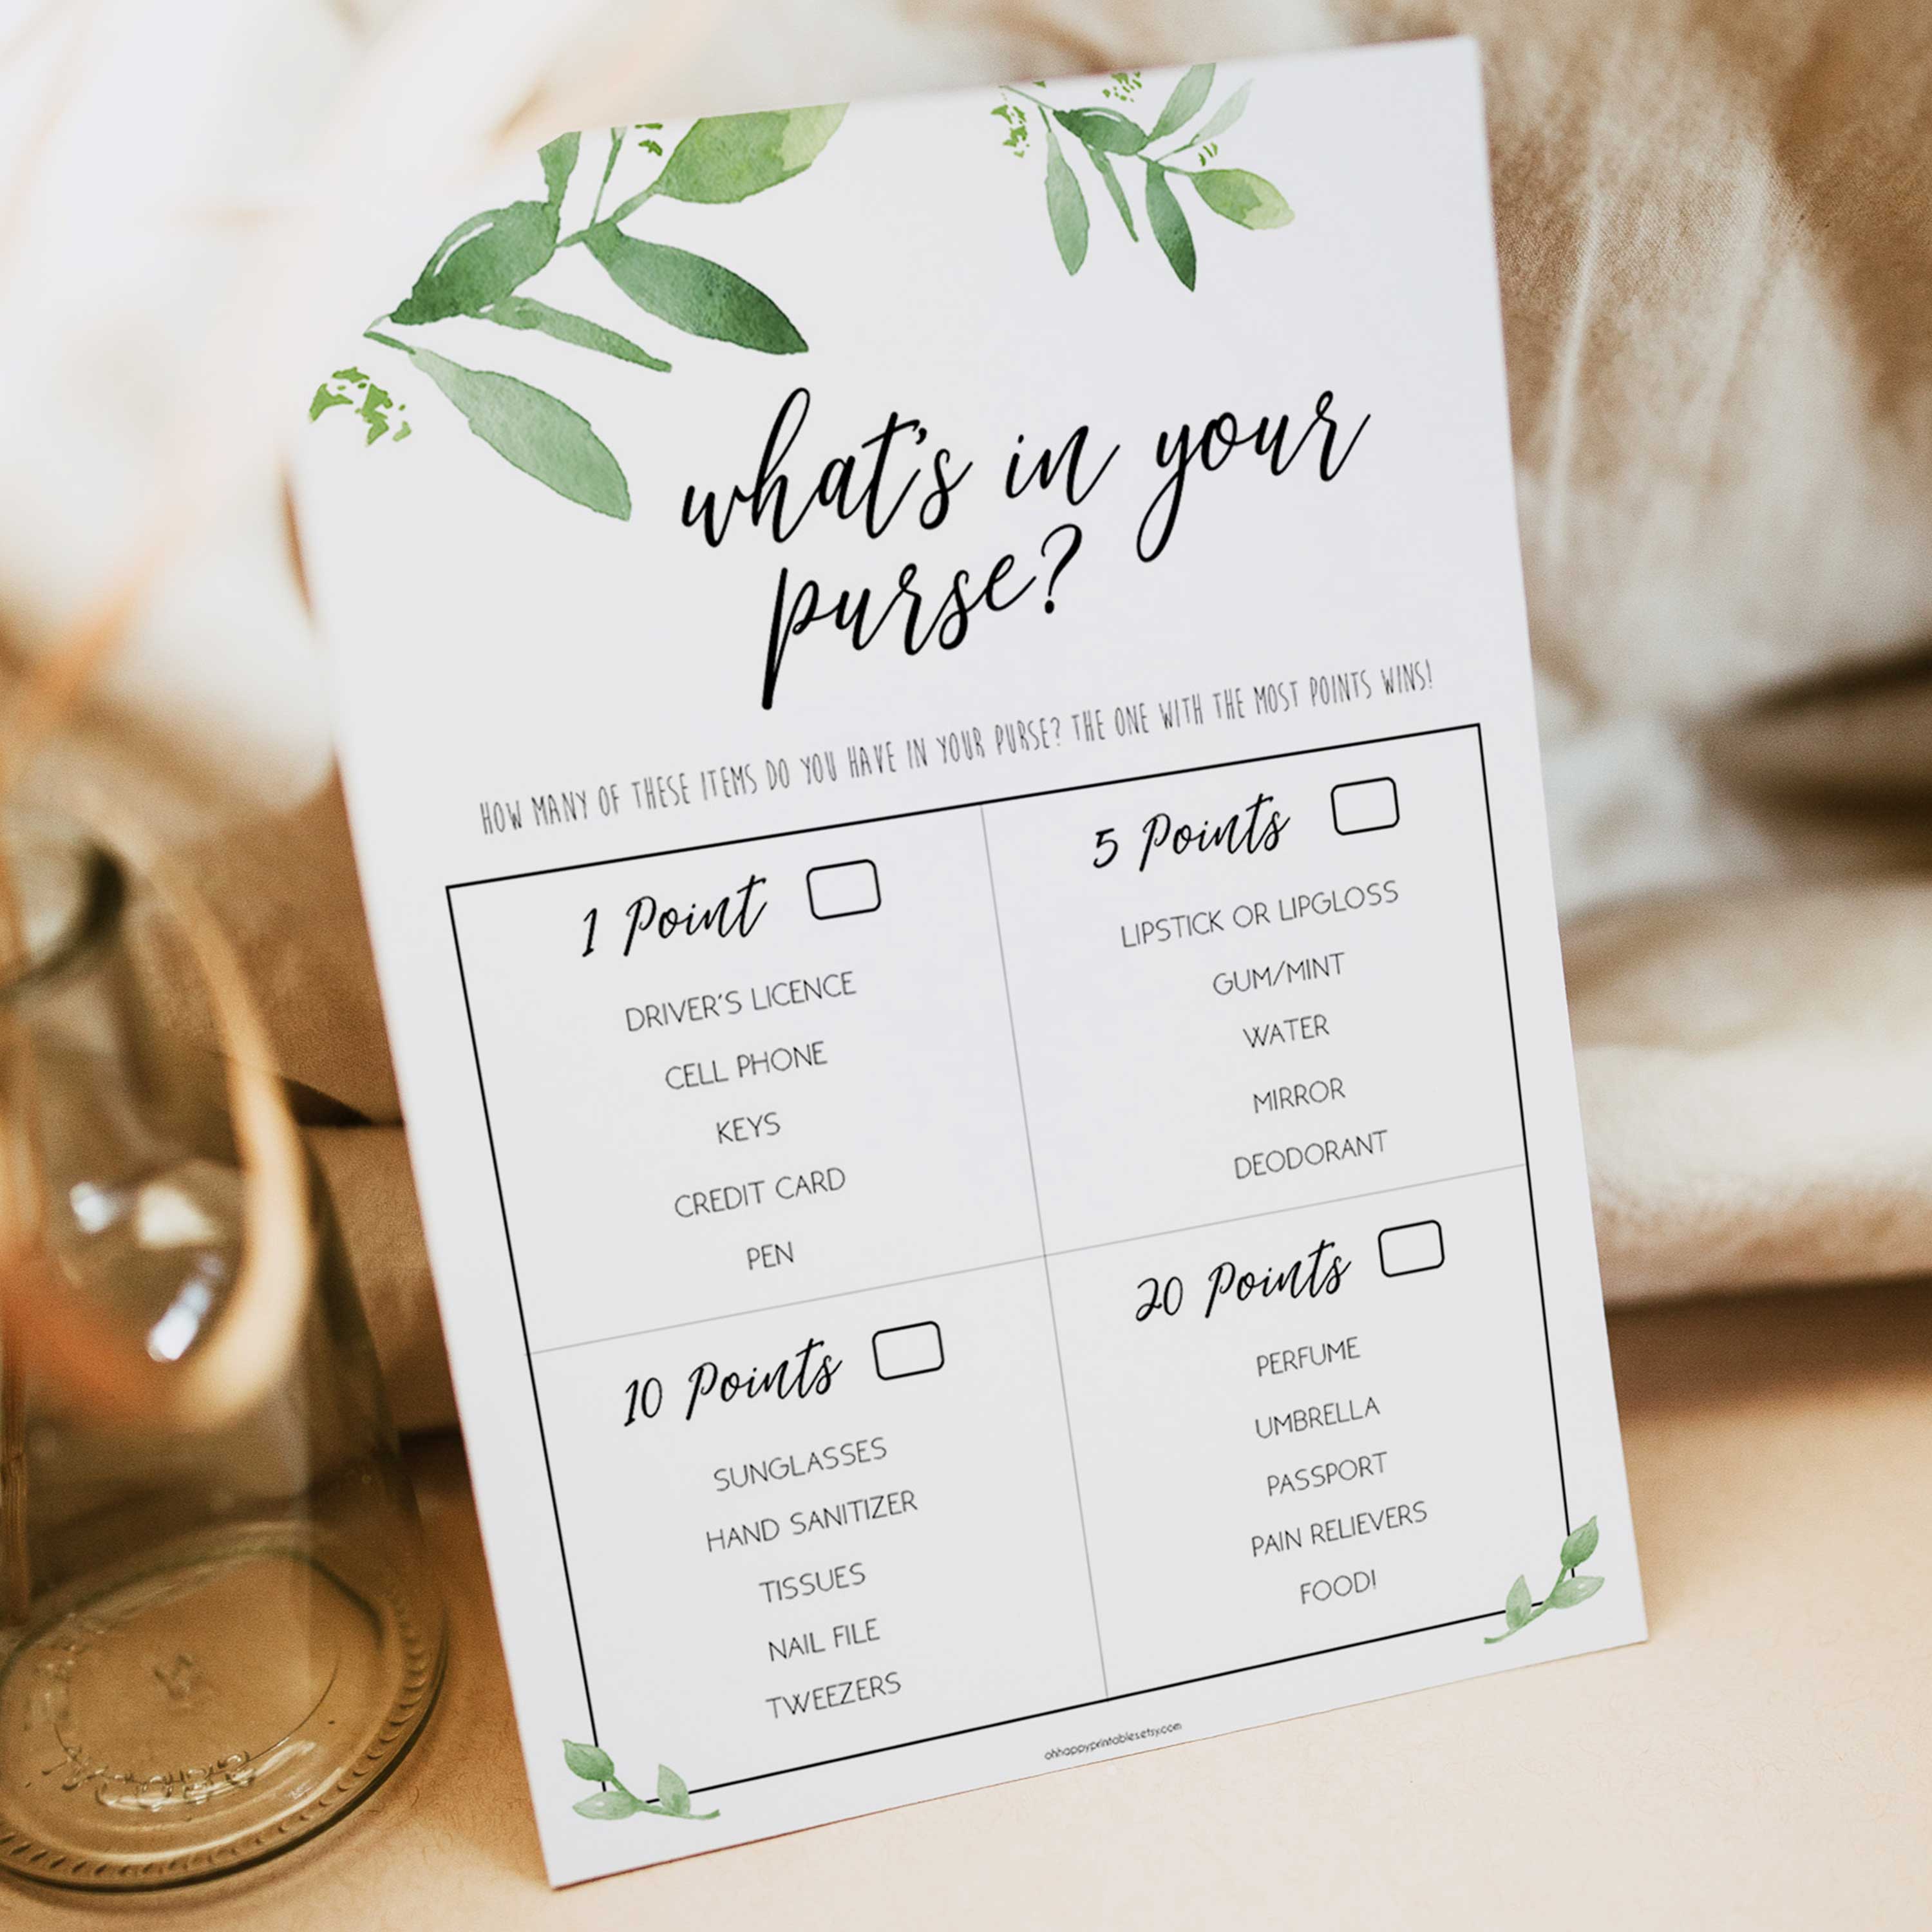 whats in your purse game, greenery bridal shower, fun bridal shower games, bachelorette party games, floral bridal games, hen party ideas